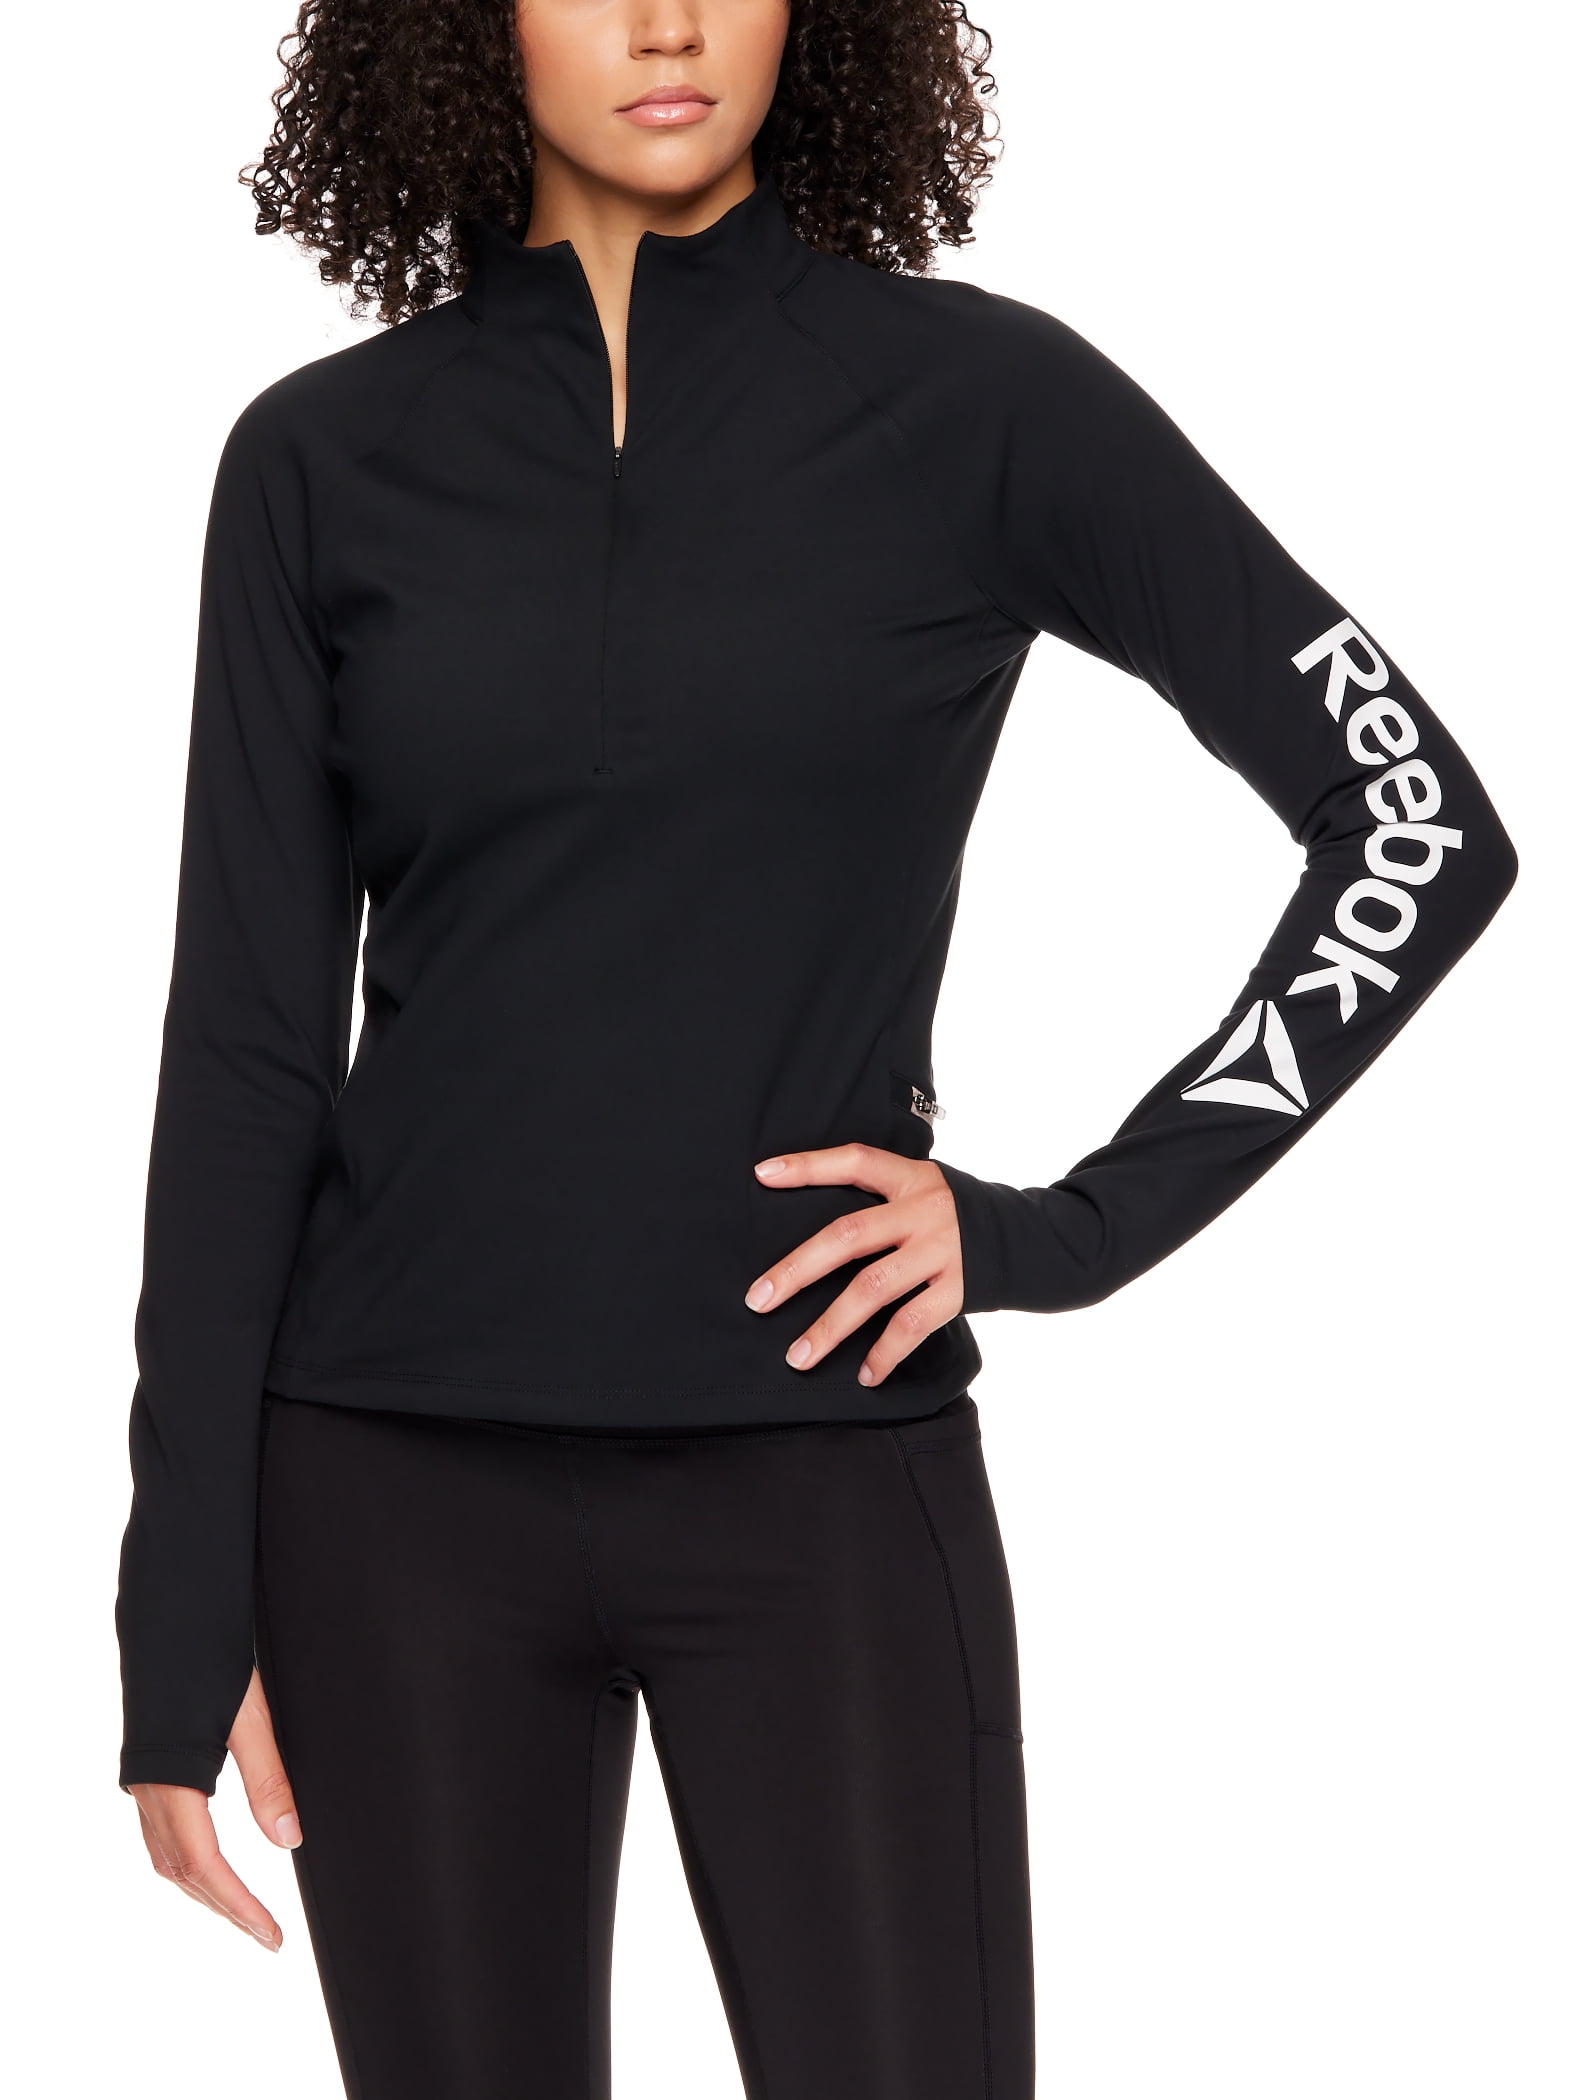 Reebok Women's Focus Cropped Performance 1/2 Zip with Front Invisible Zipper and Zipper Pocket